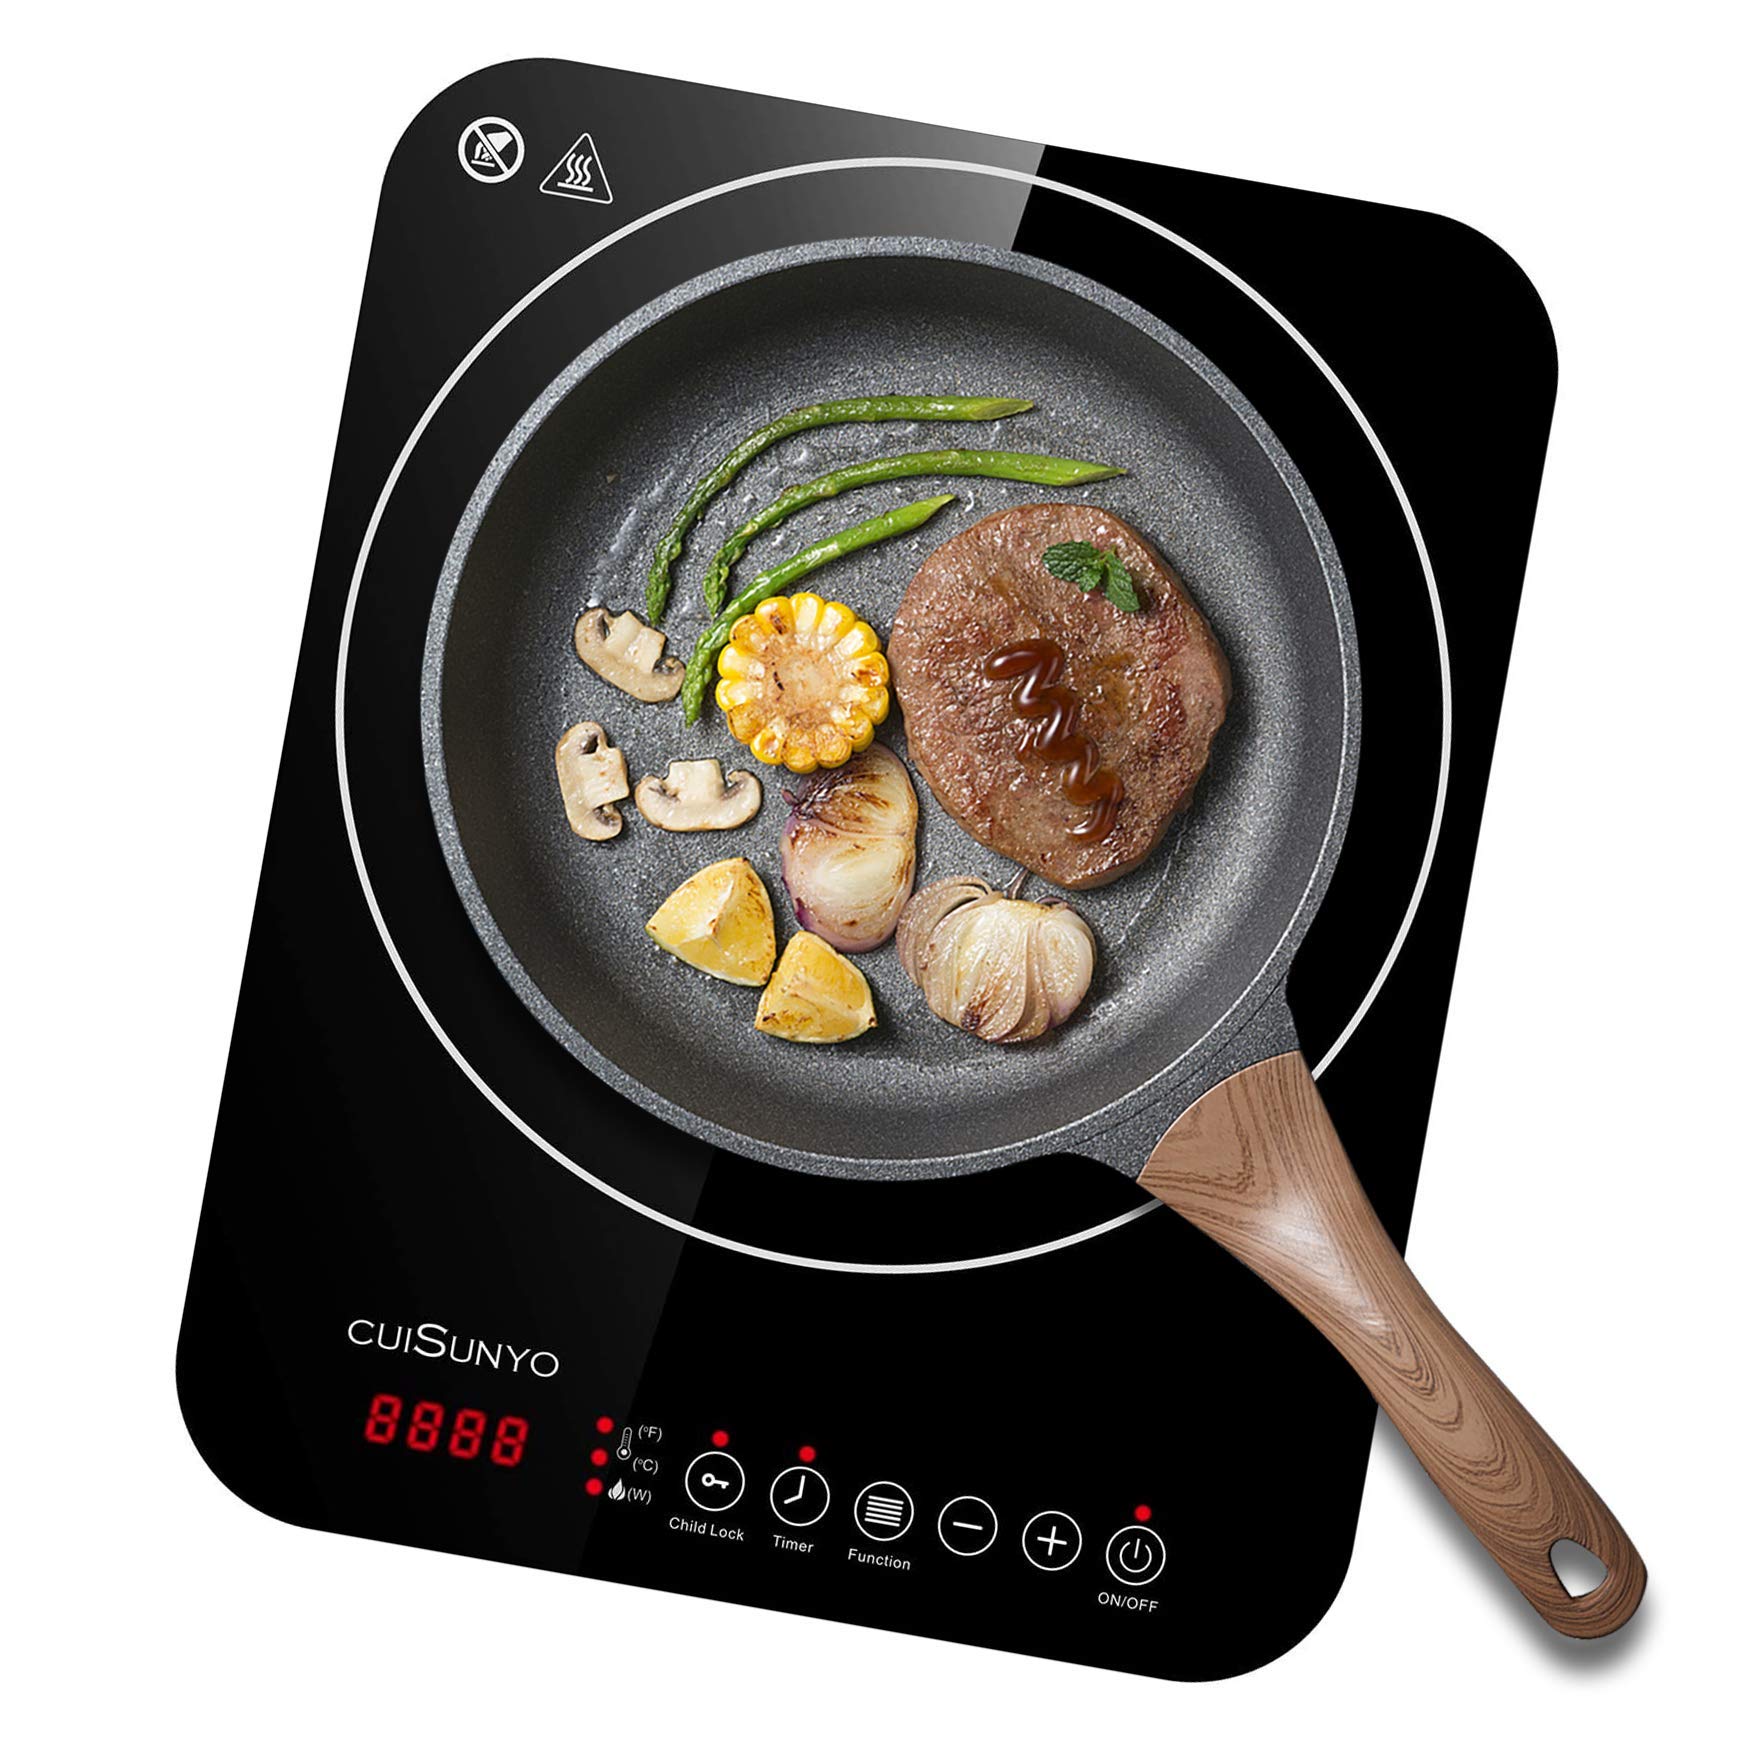 cuisunyo-portable-induction-cooktop-1800w-electric-stovetop-burner-top